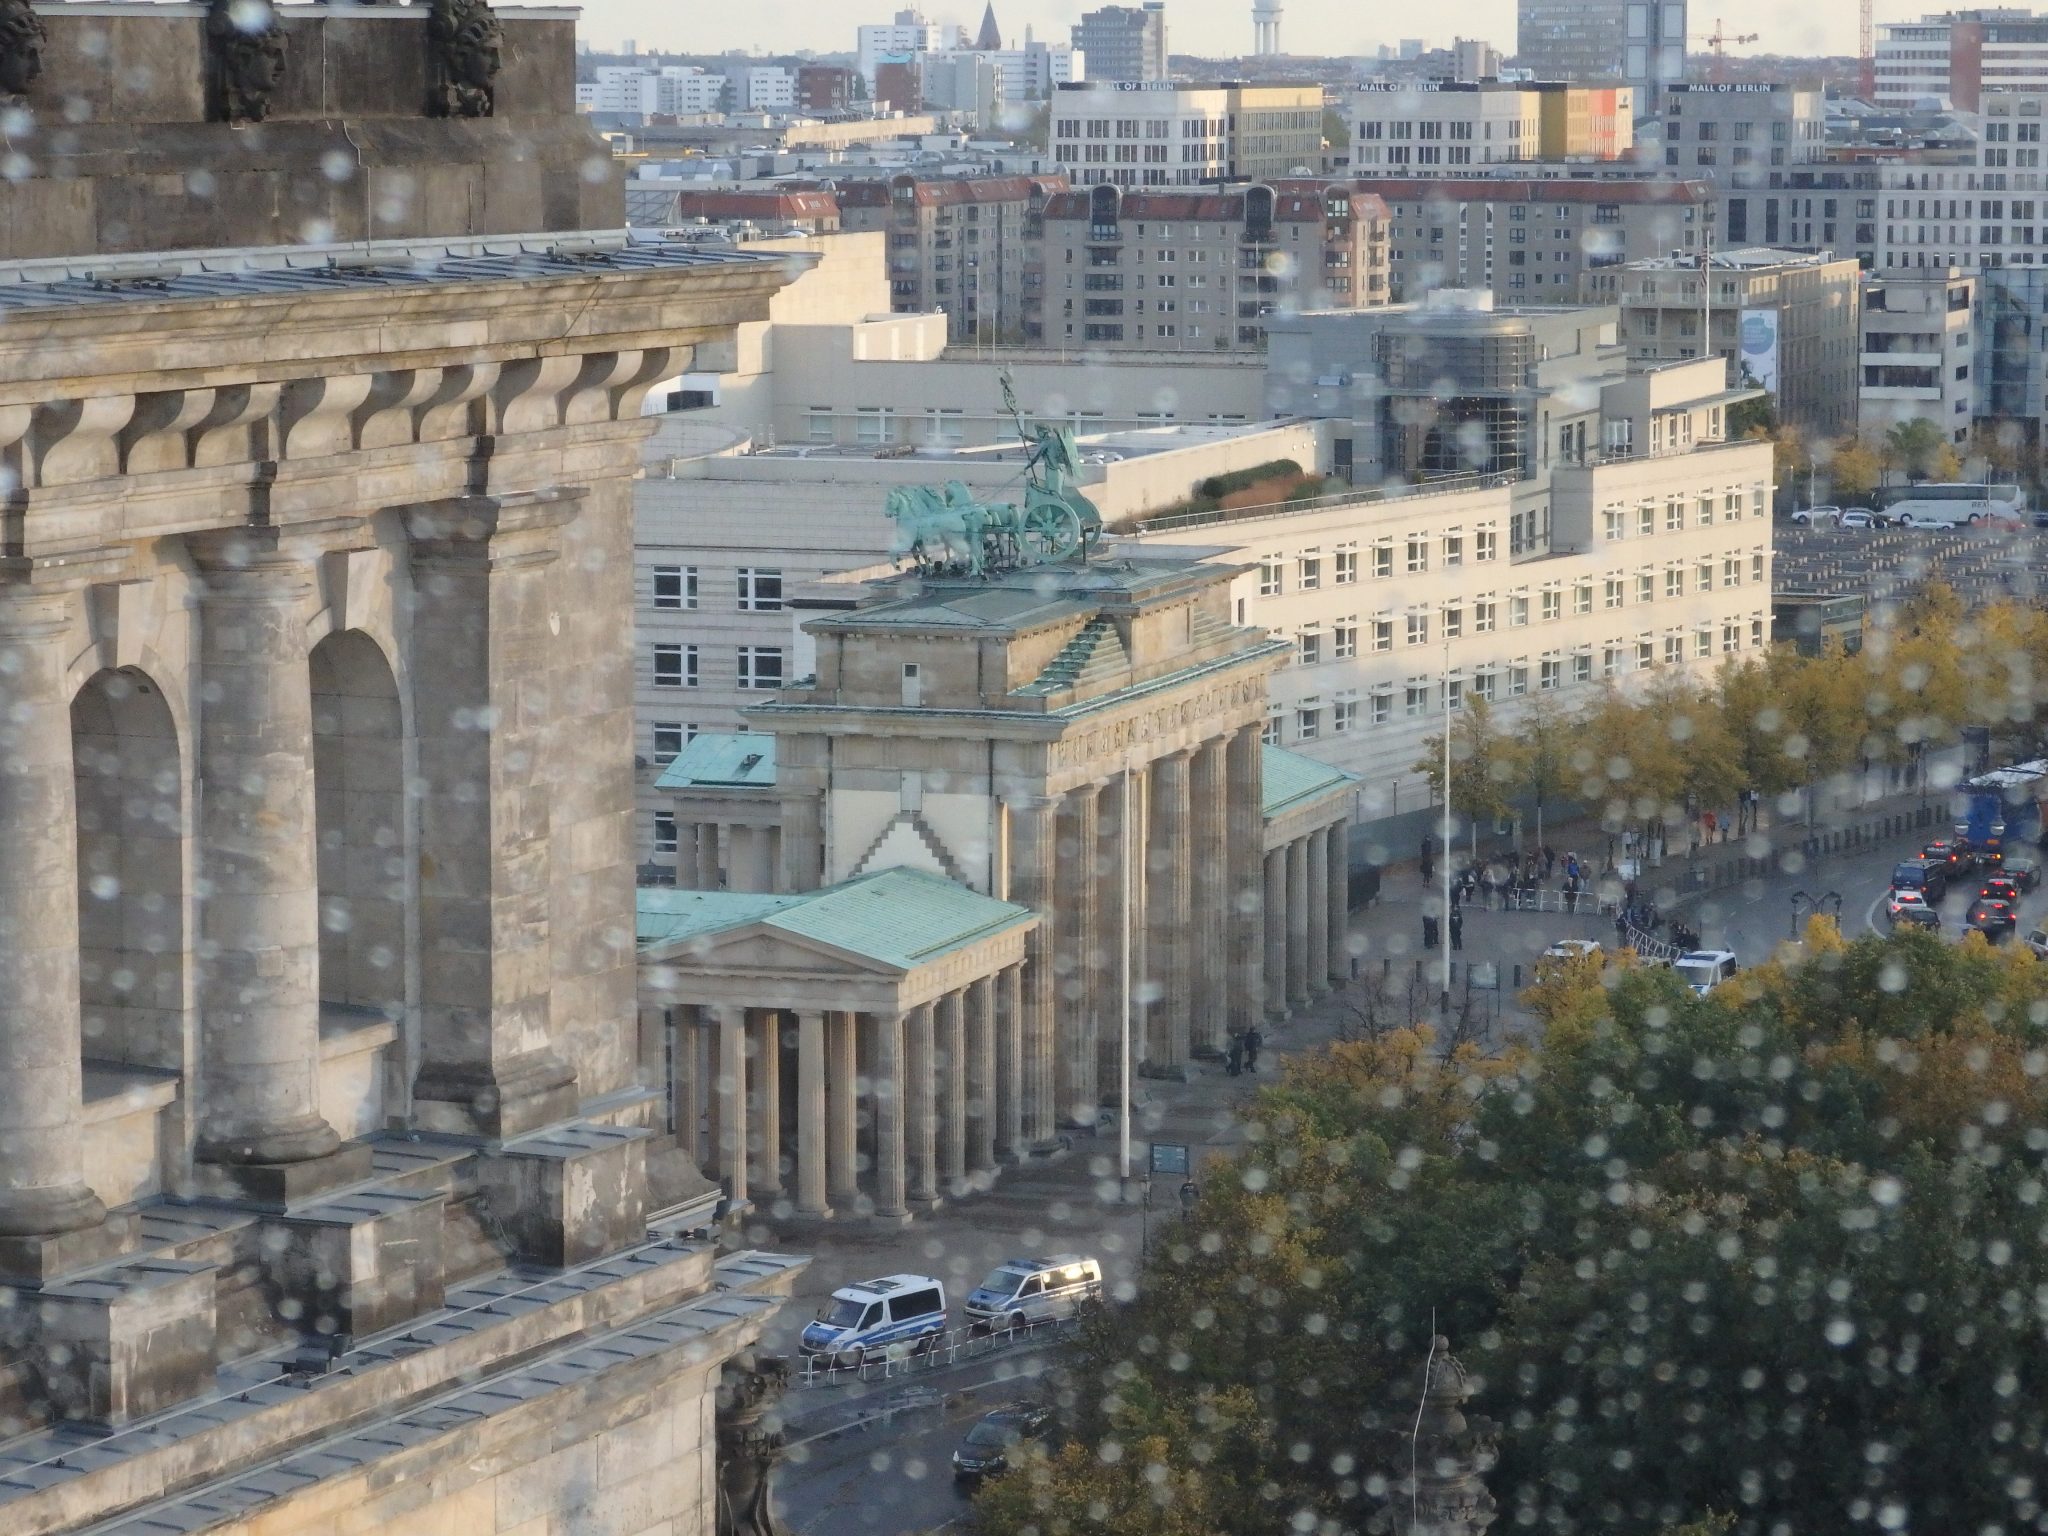 This picture shows the famous Brandenburg Gate. Built in the late 18th century, it was meant to represent peace. During the Cold War it was on East German territory and inaccessible to both East and West Germans. The white building just beyond it is the new US Embassy.